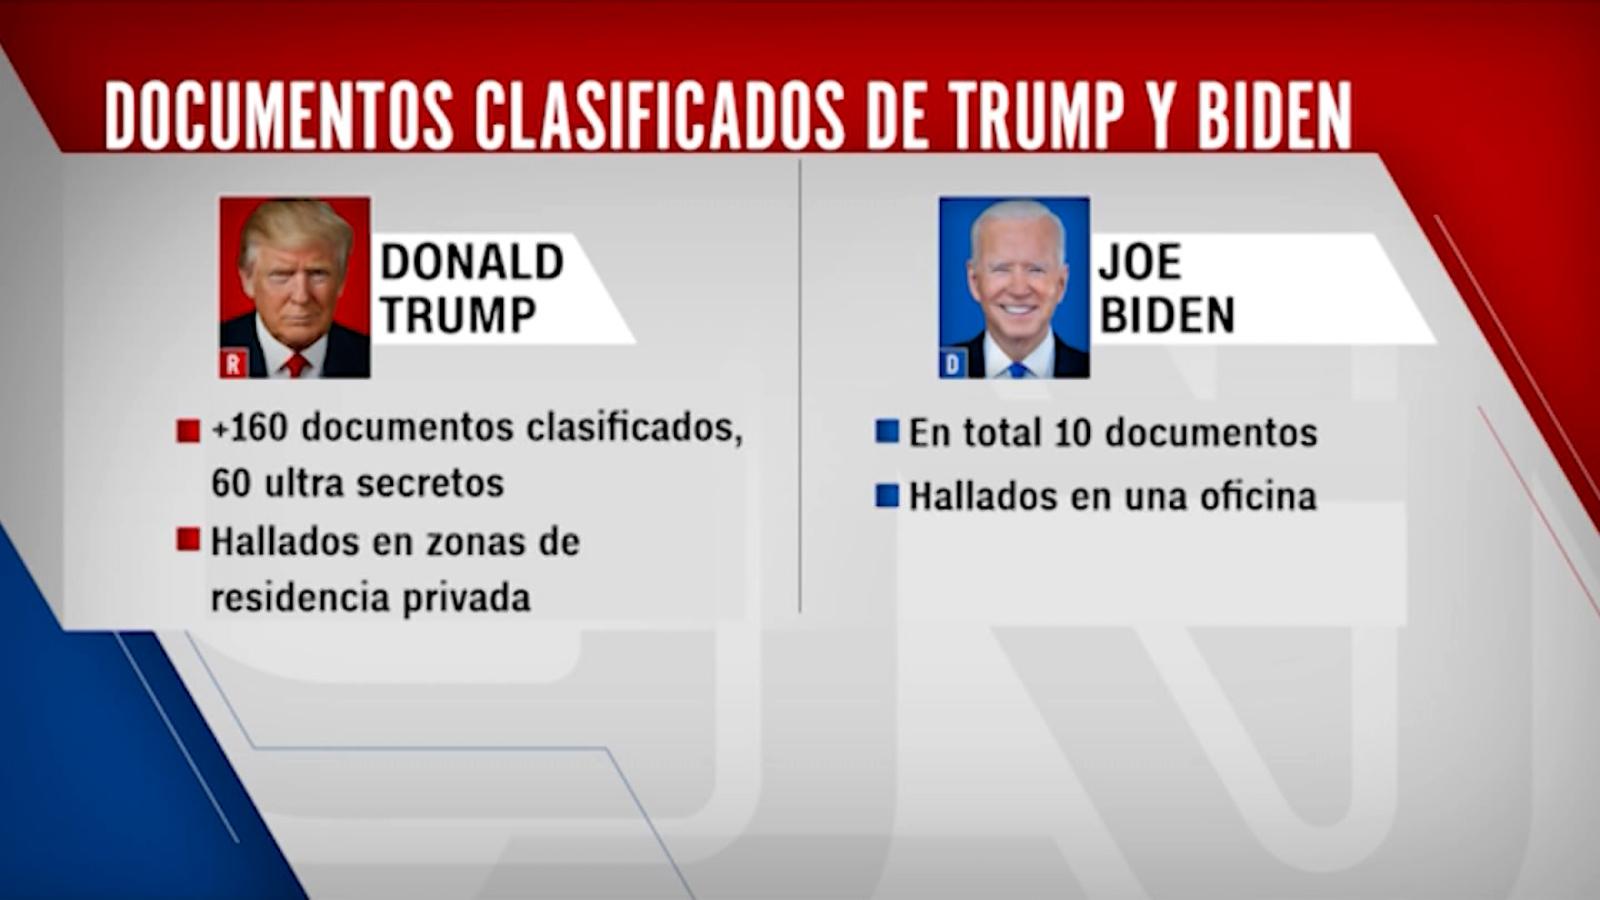 The Differences Between Biden and Trump's Classified Documents